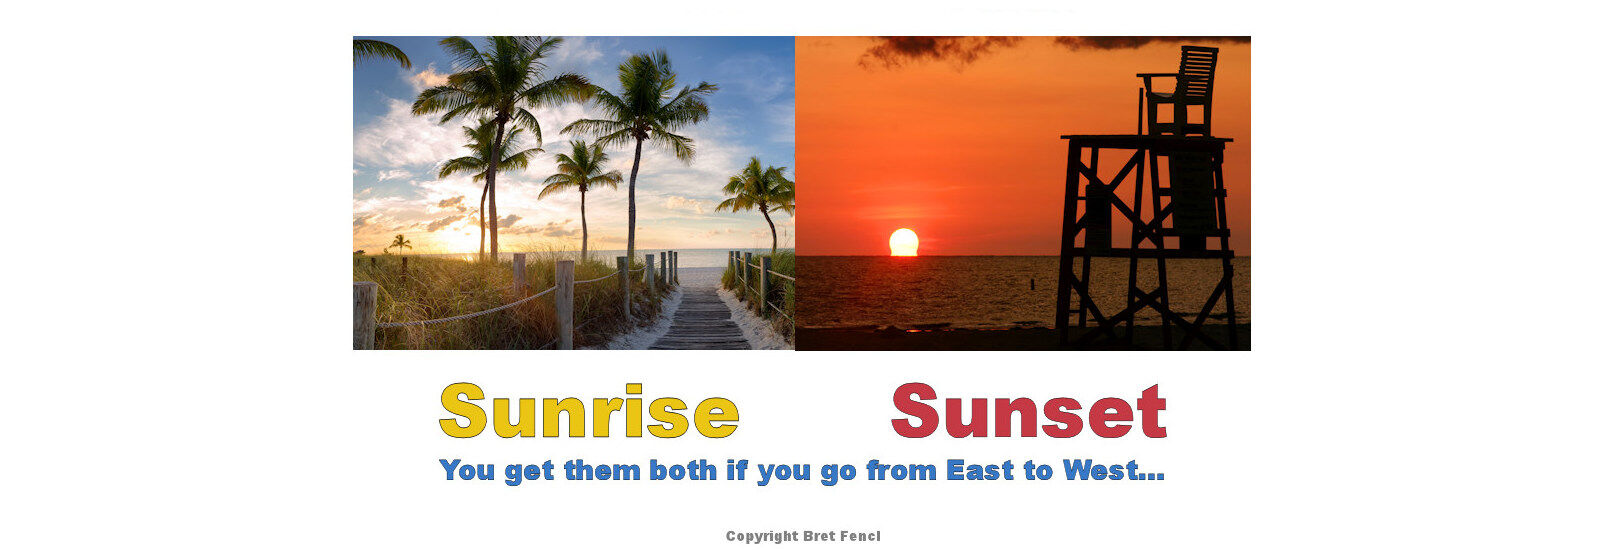 Sunrise and Sunset, You get them both if you go from East to West...